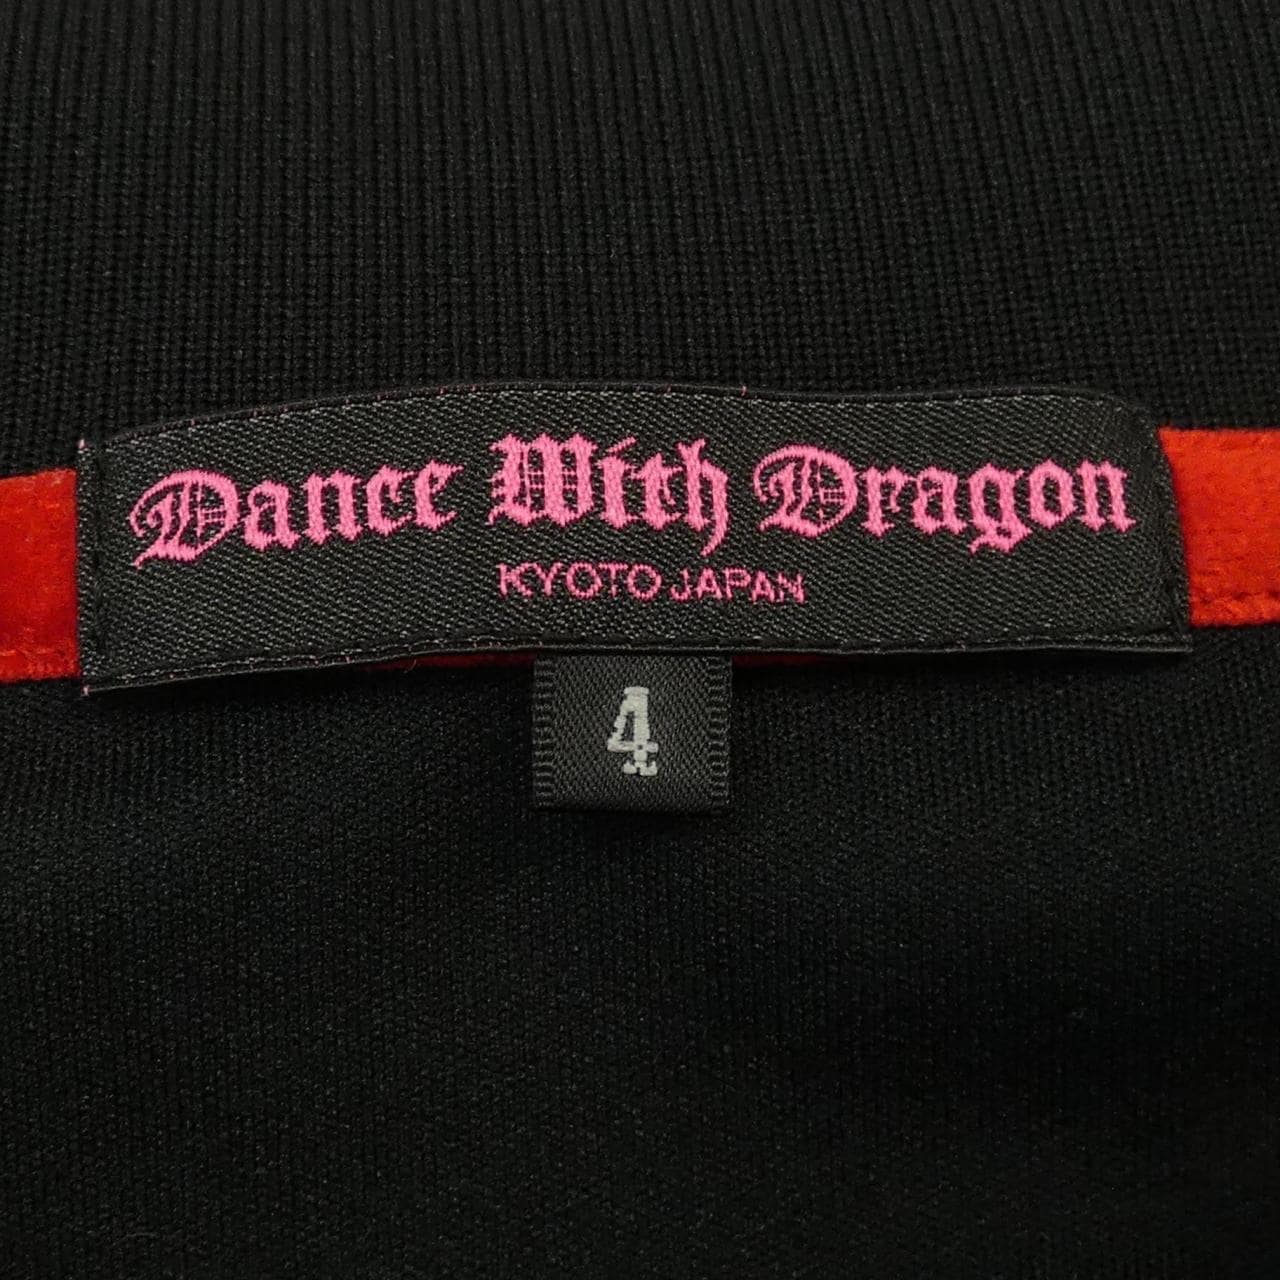 DANCE WITH DRAGON ポロシャツ